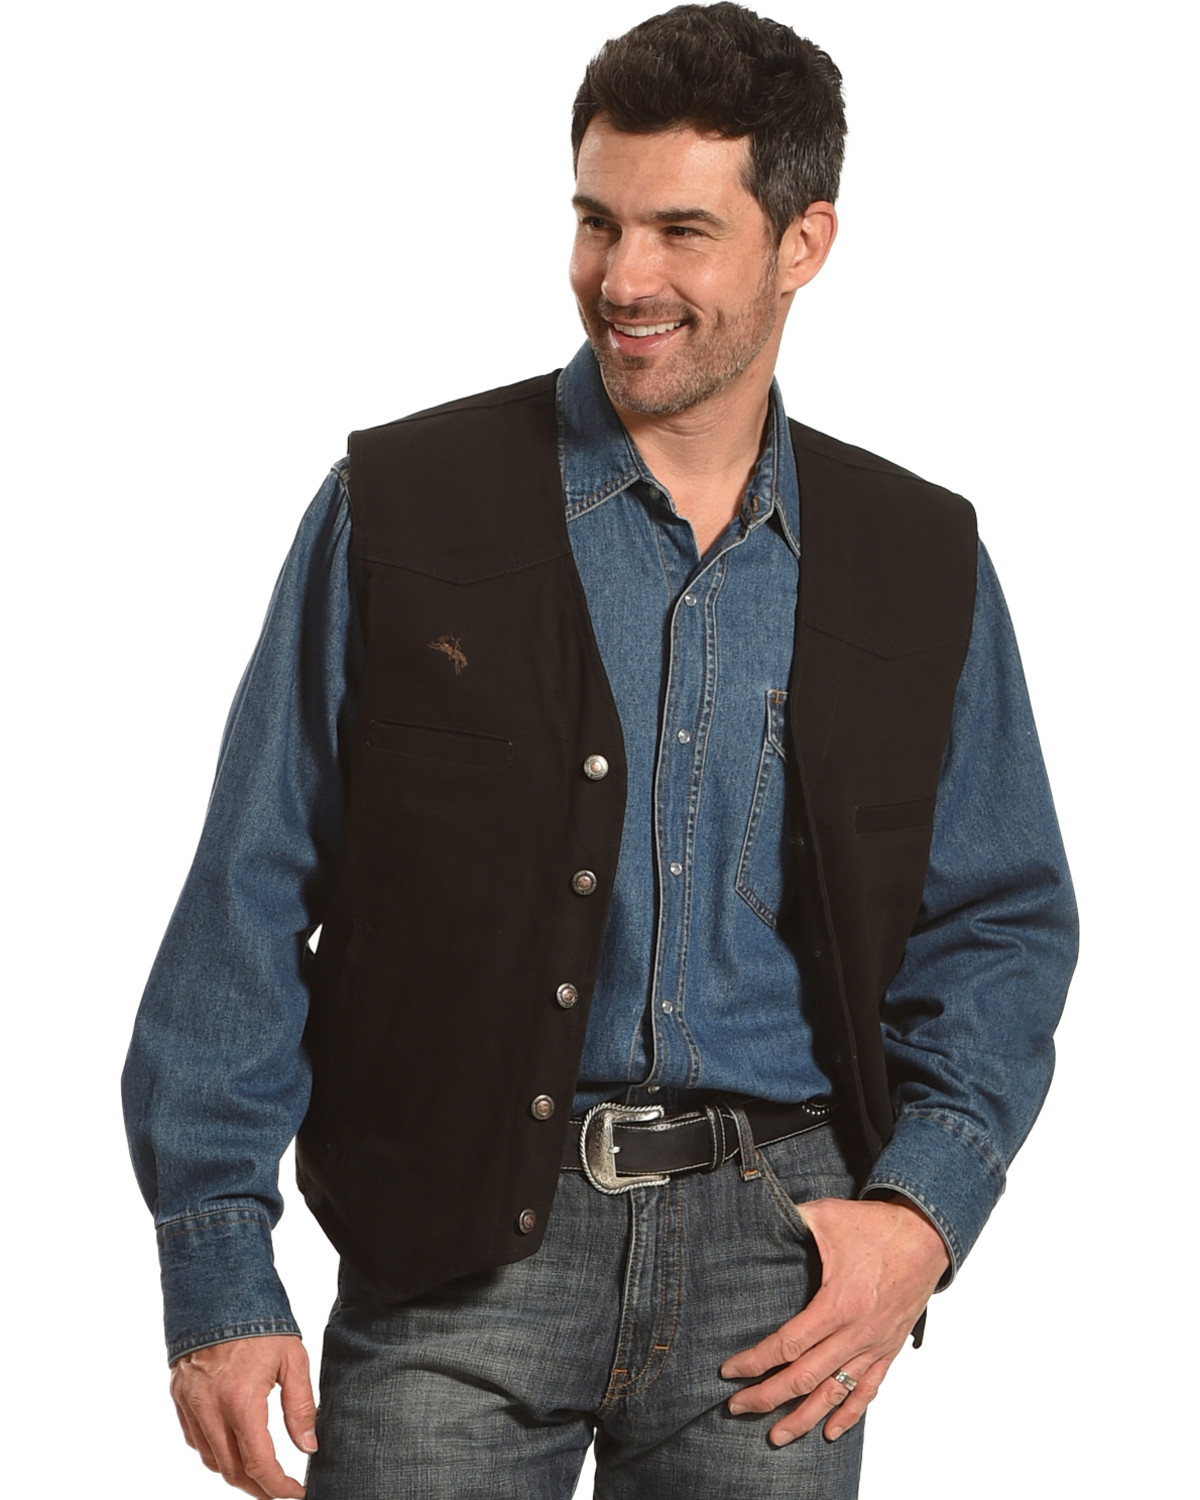 Wyoming Traders Men's Texas Concealed Carry Vest